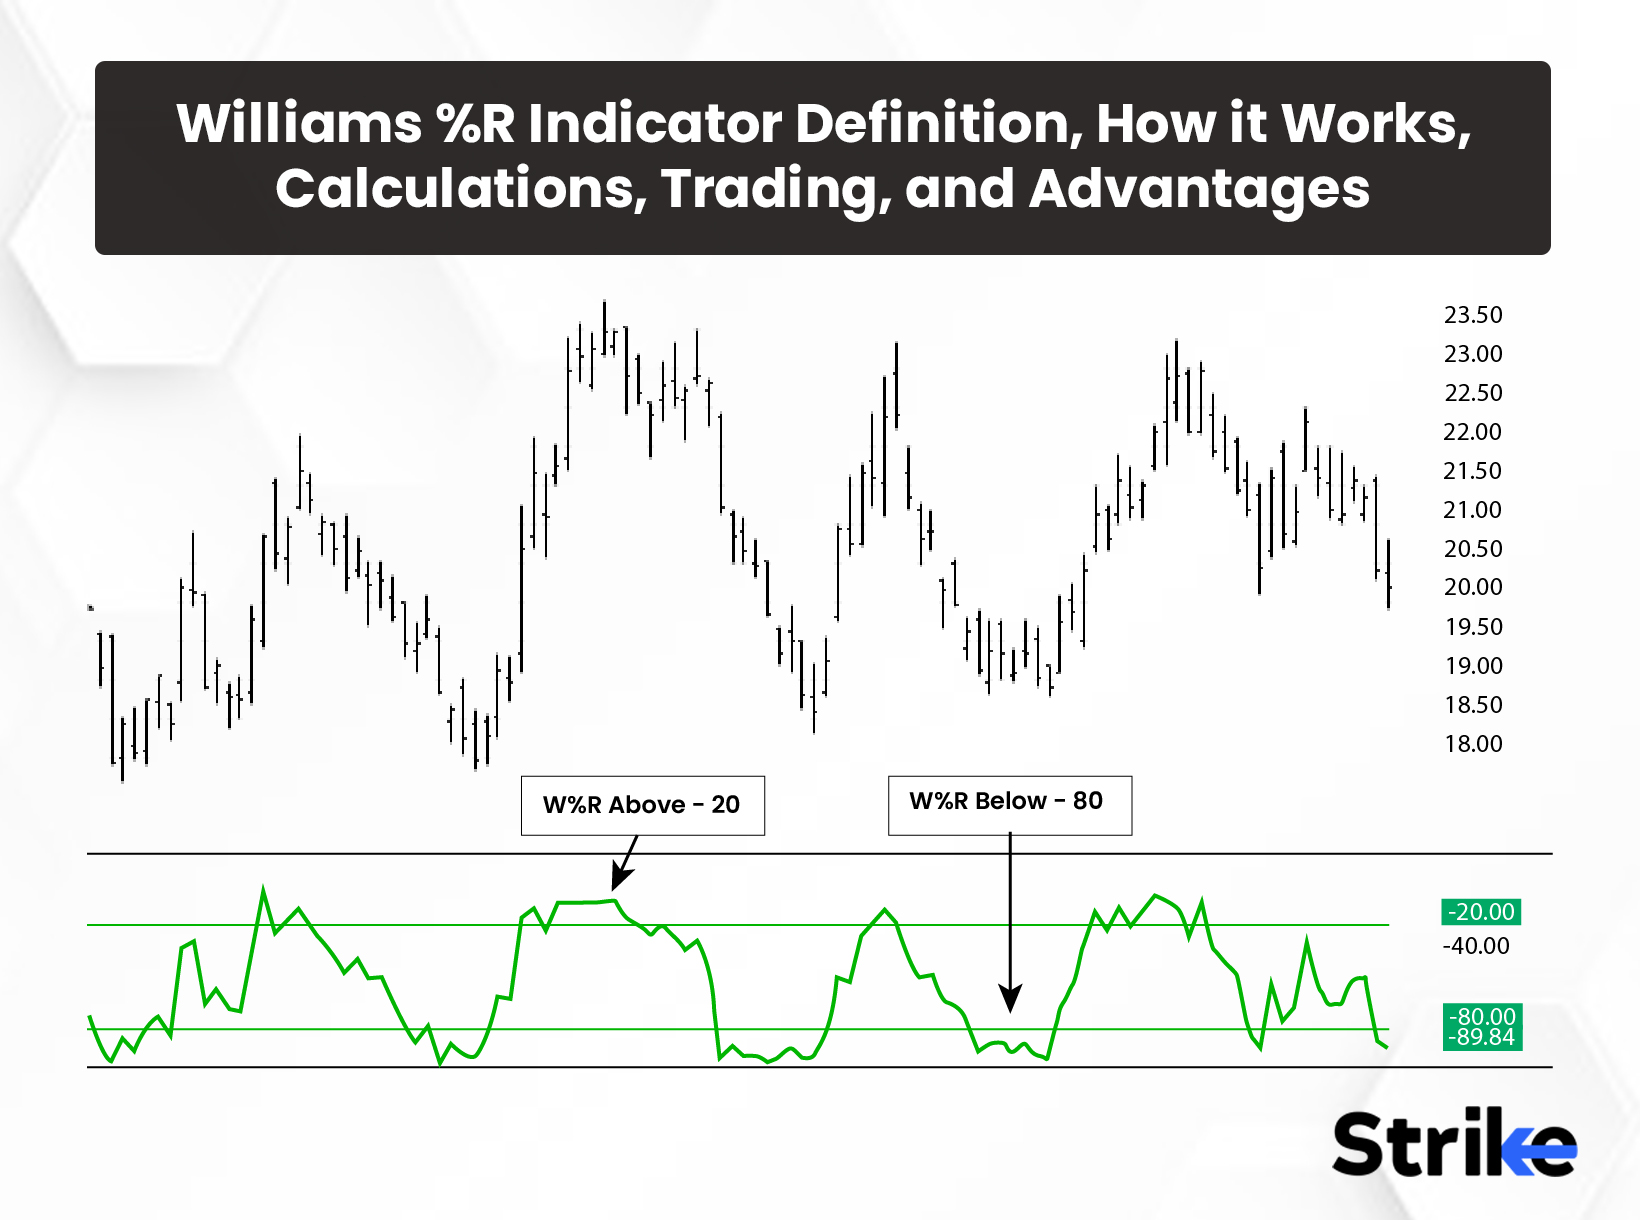 Williams %R Indicator: Definition, How it Works, Calculations, Trading, and Advantages